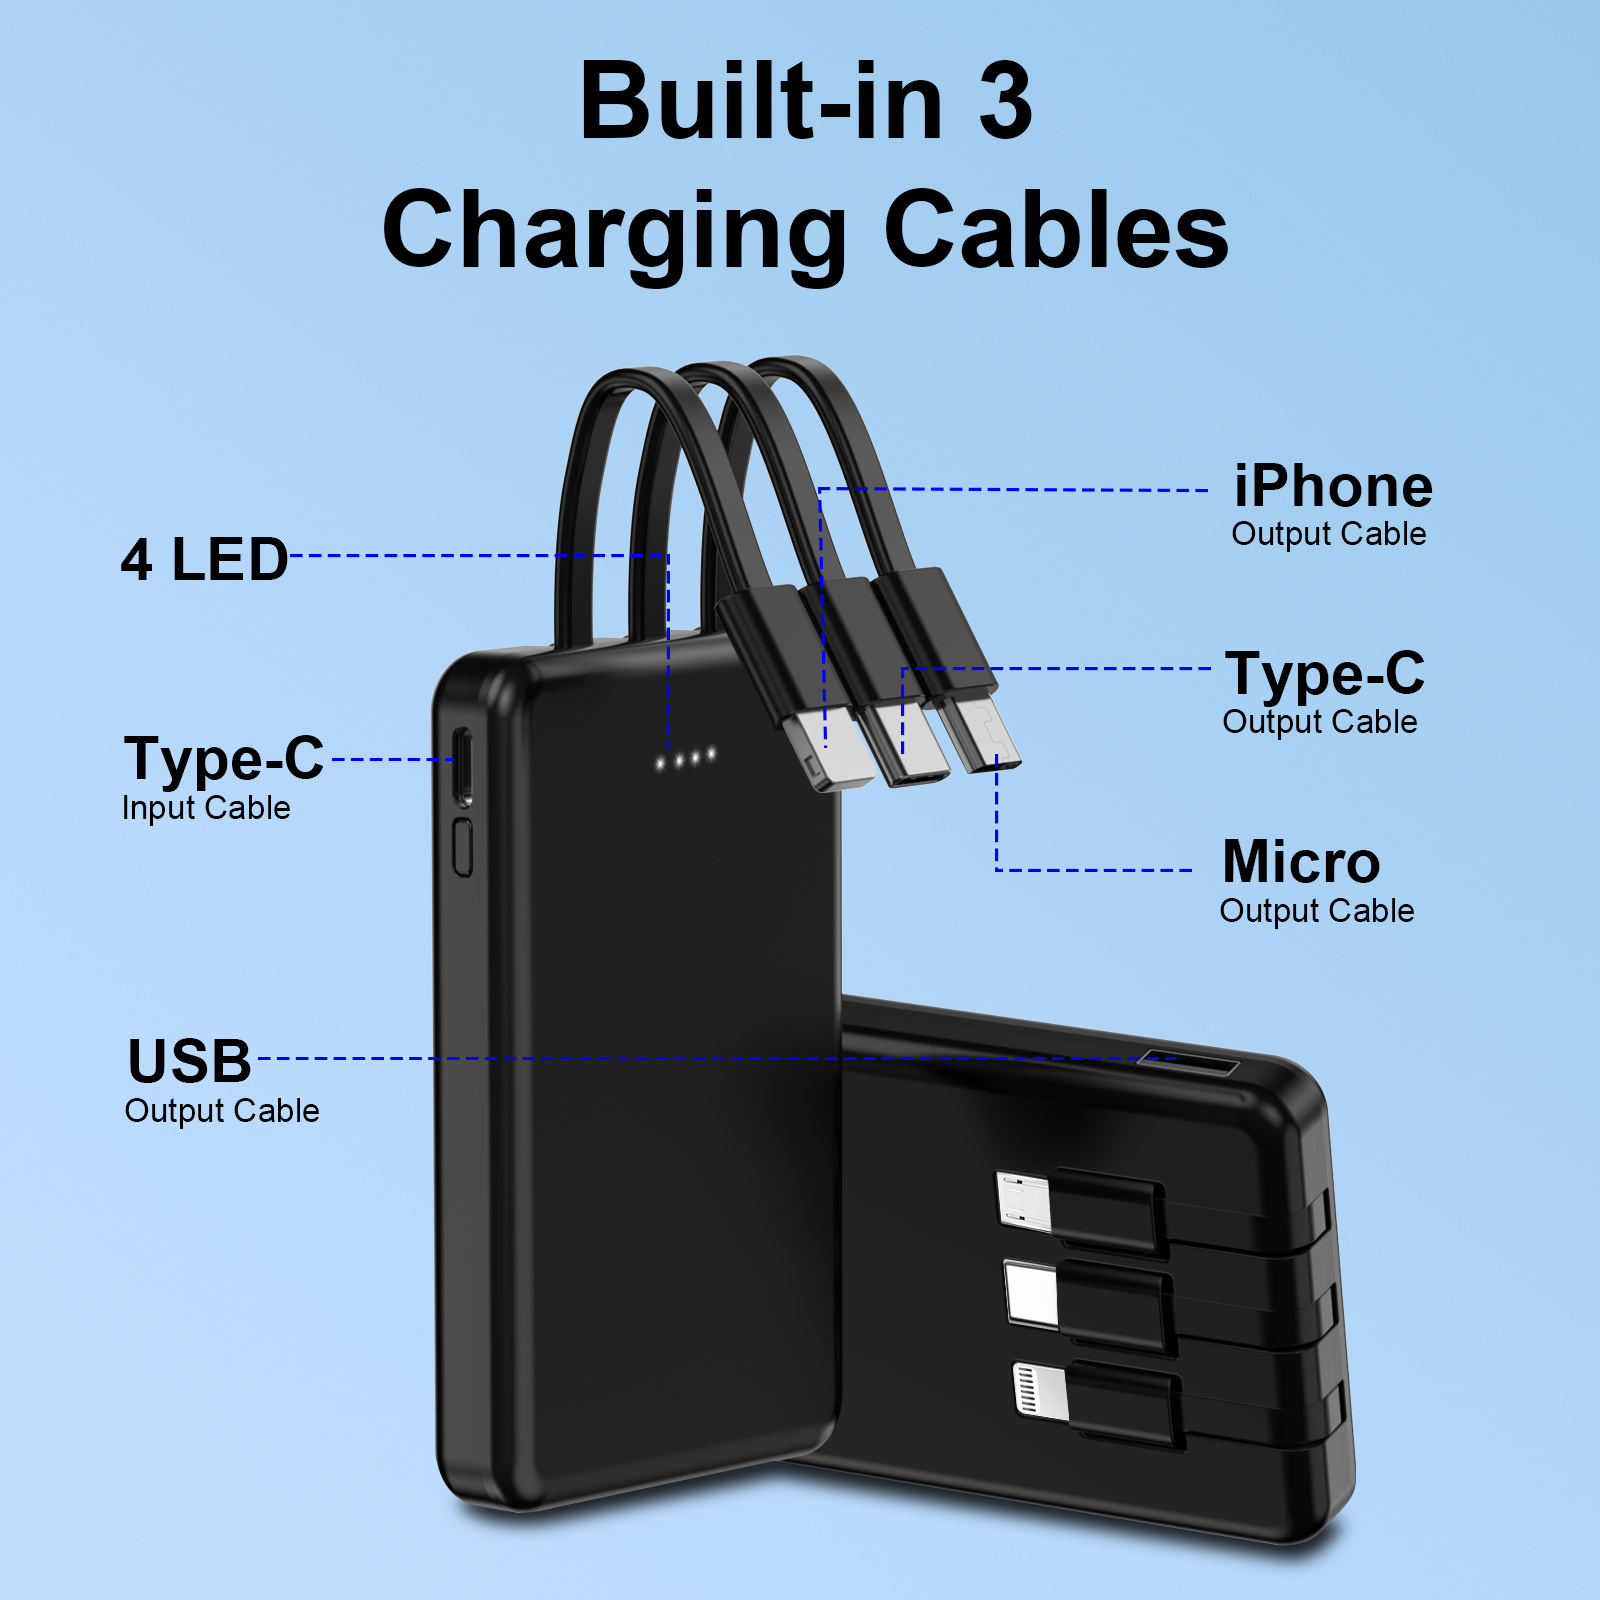 portable mobile phone charger built in cable mini mobile power supply slim and lightweight usb battery pack external mobile phone charger for samsung for iphone for ipad etc details 3